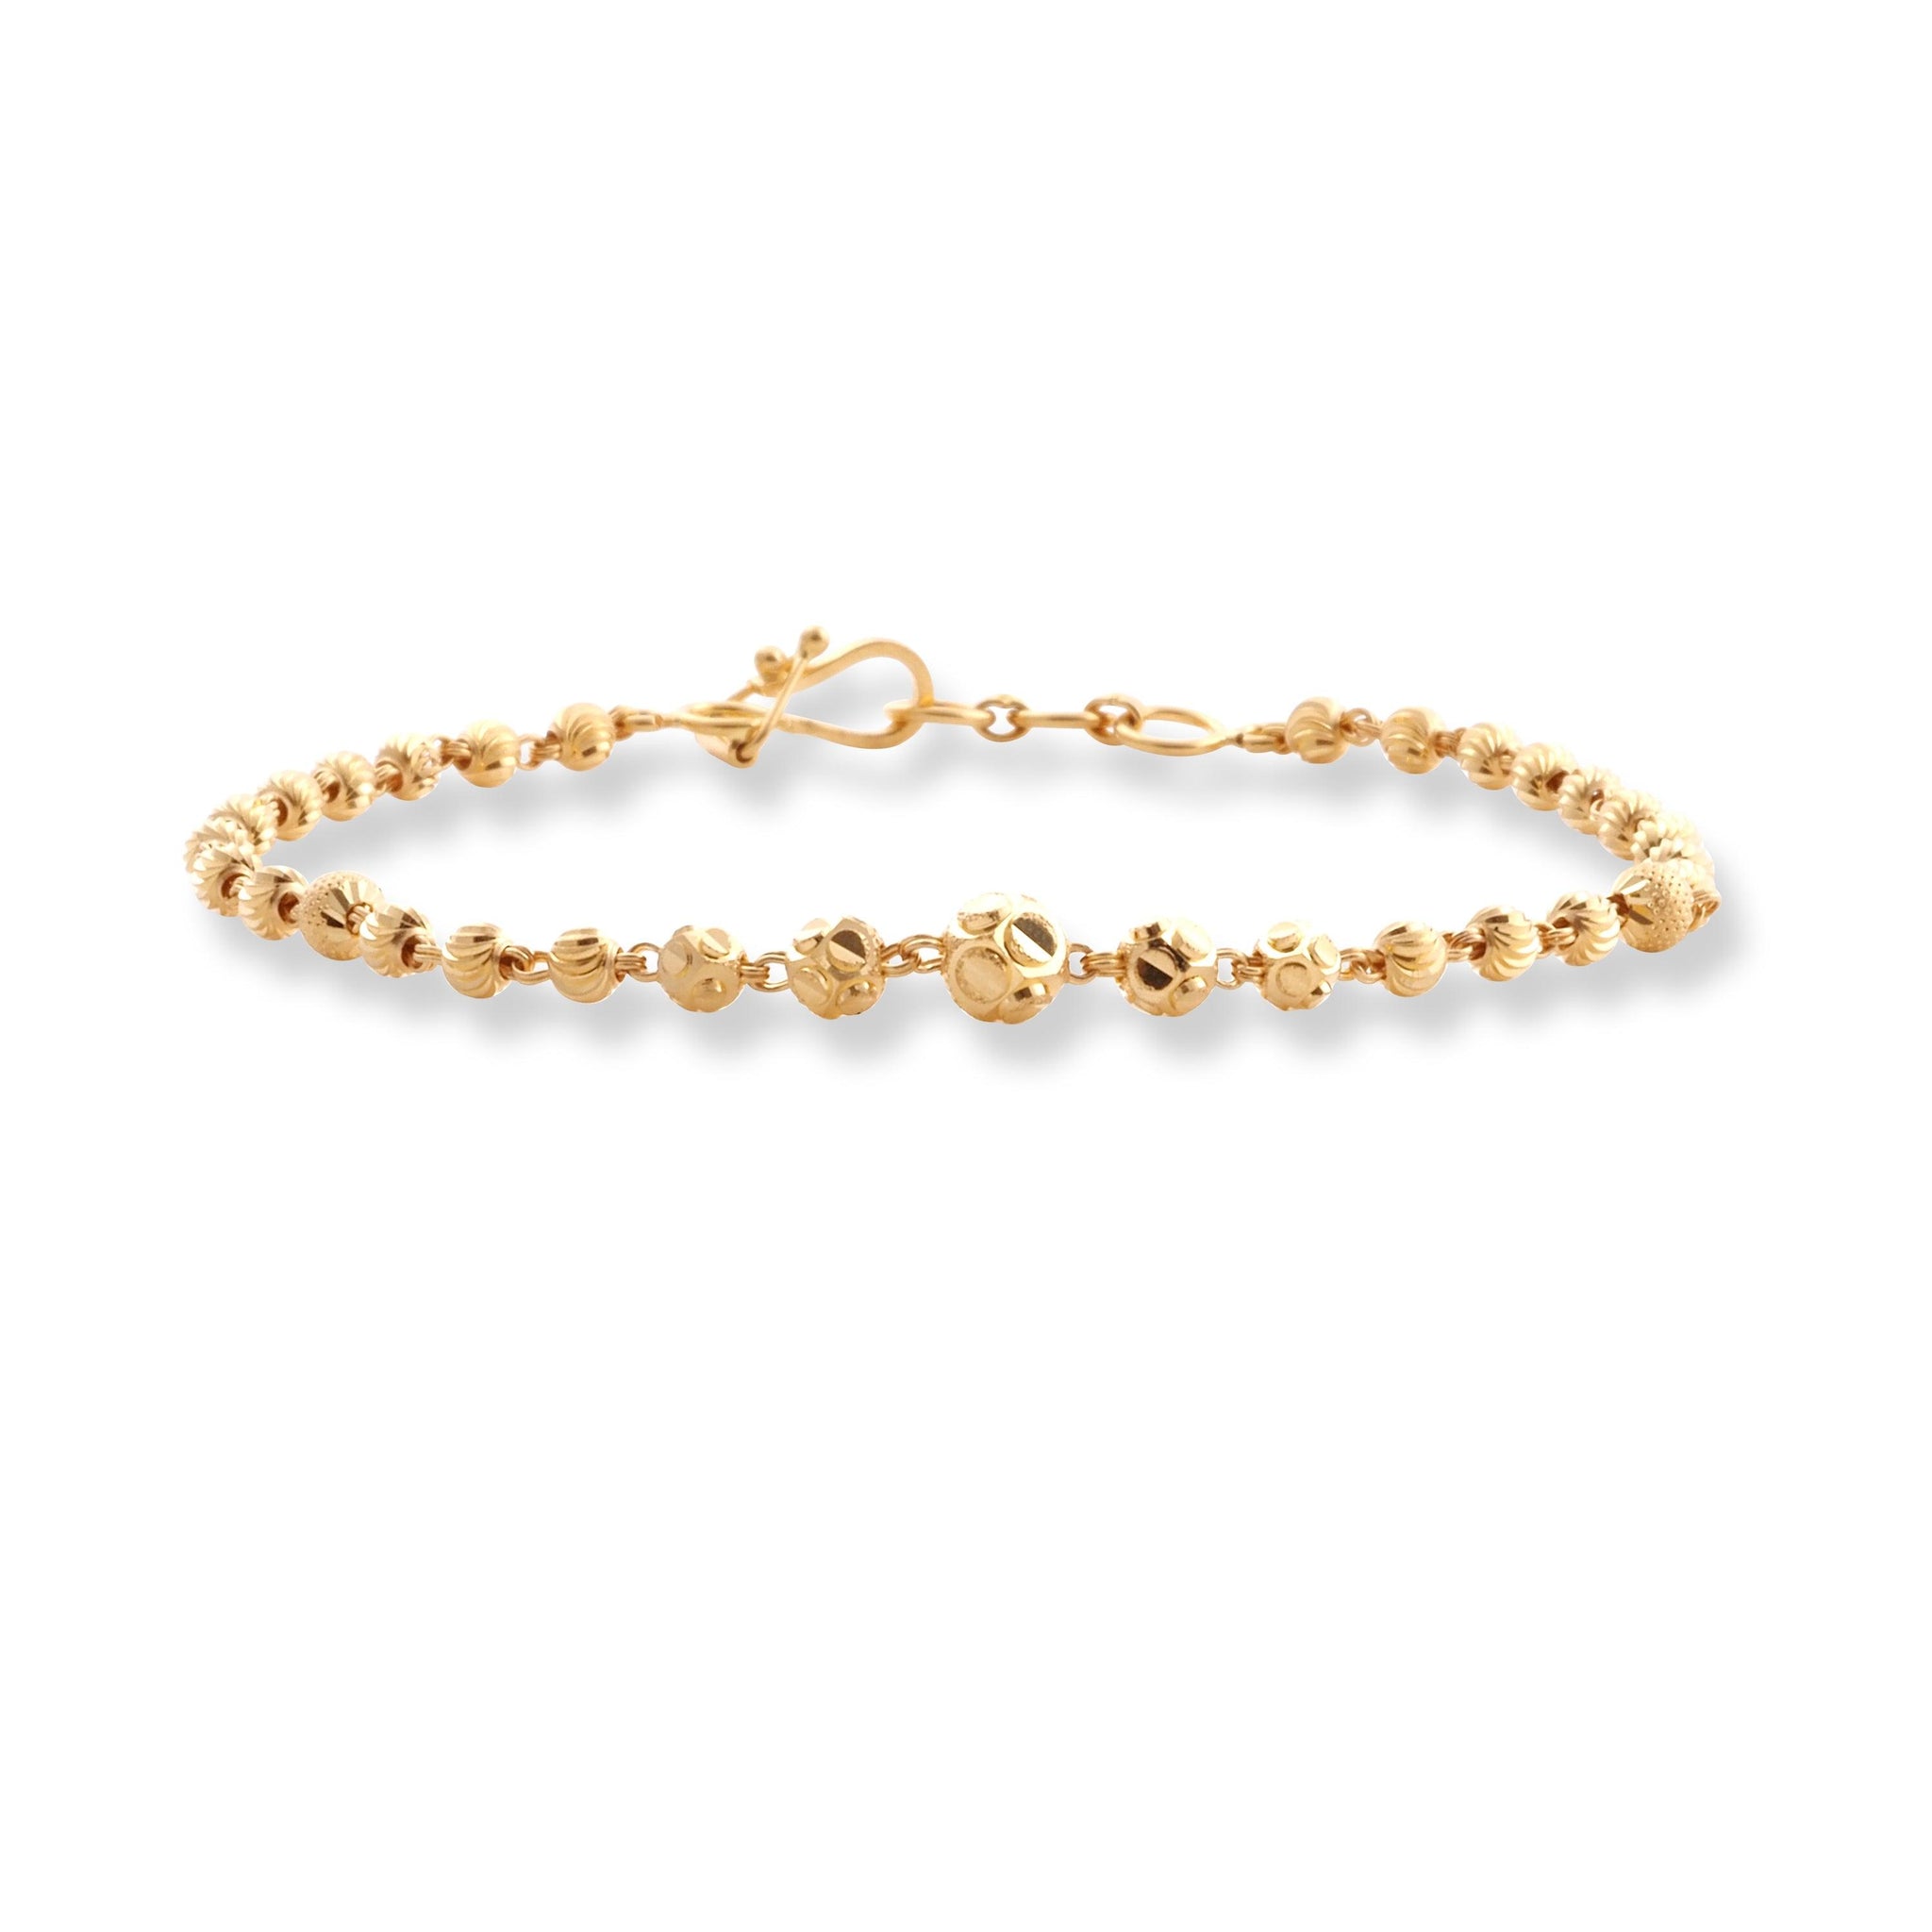 22ct Gold Bracelet with Diamond Cut Beads and Hook Clasp LBR-8514